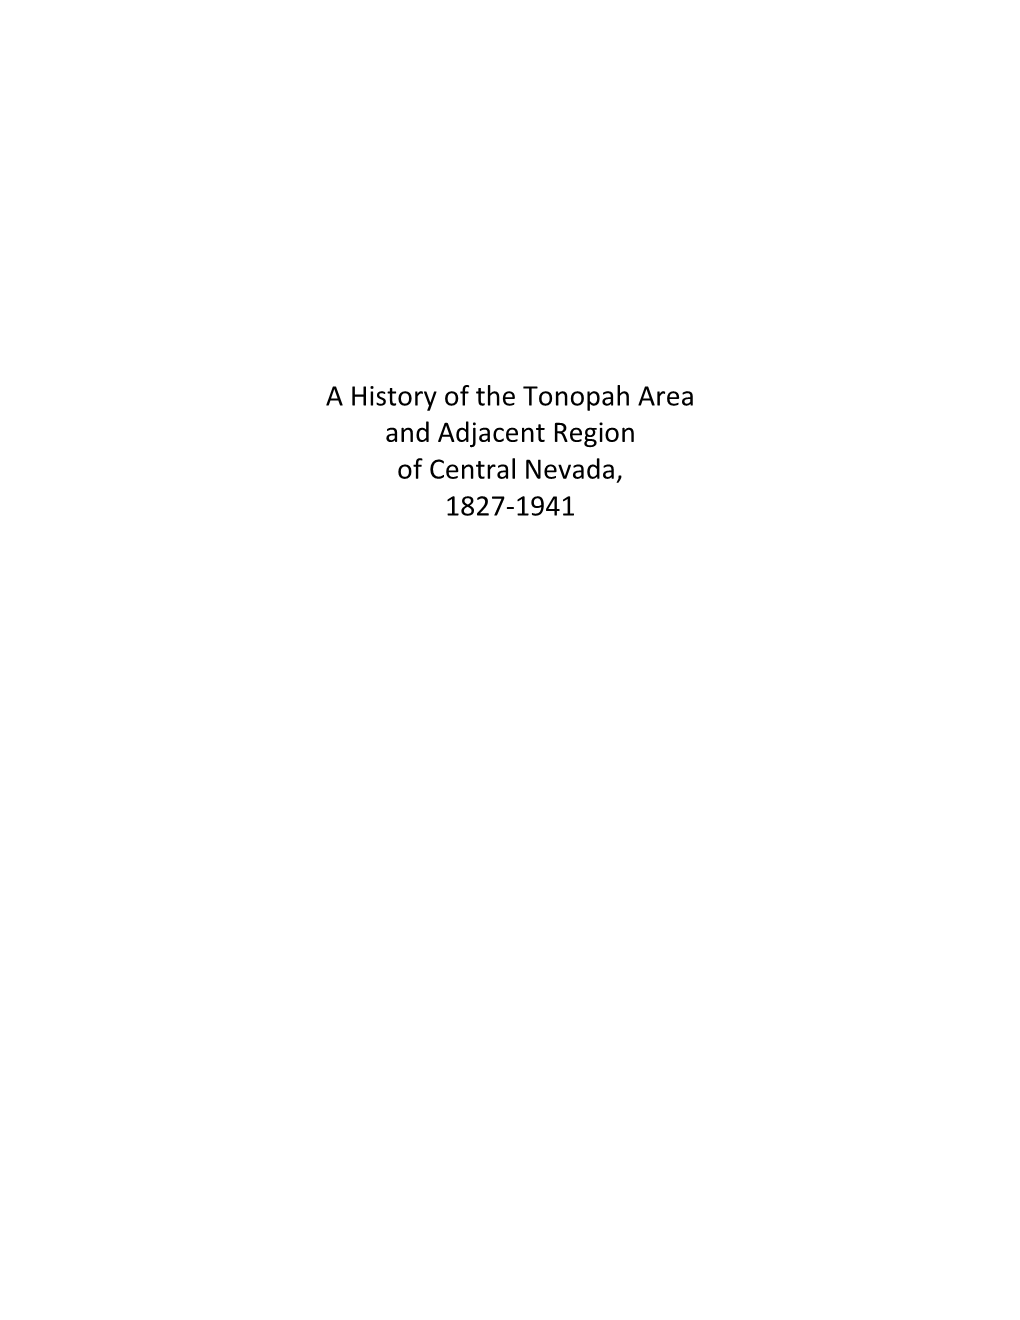 A History of the Tonopah Area and Adjacent Region of Central Nevada, 1827-1941